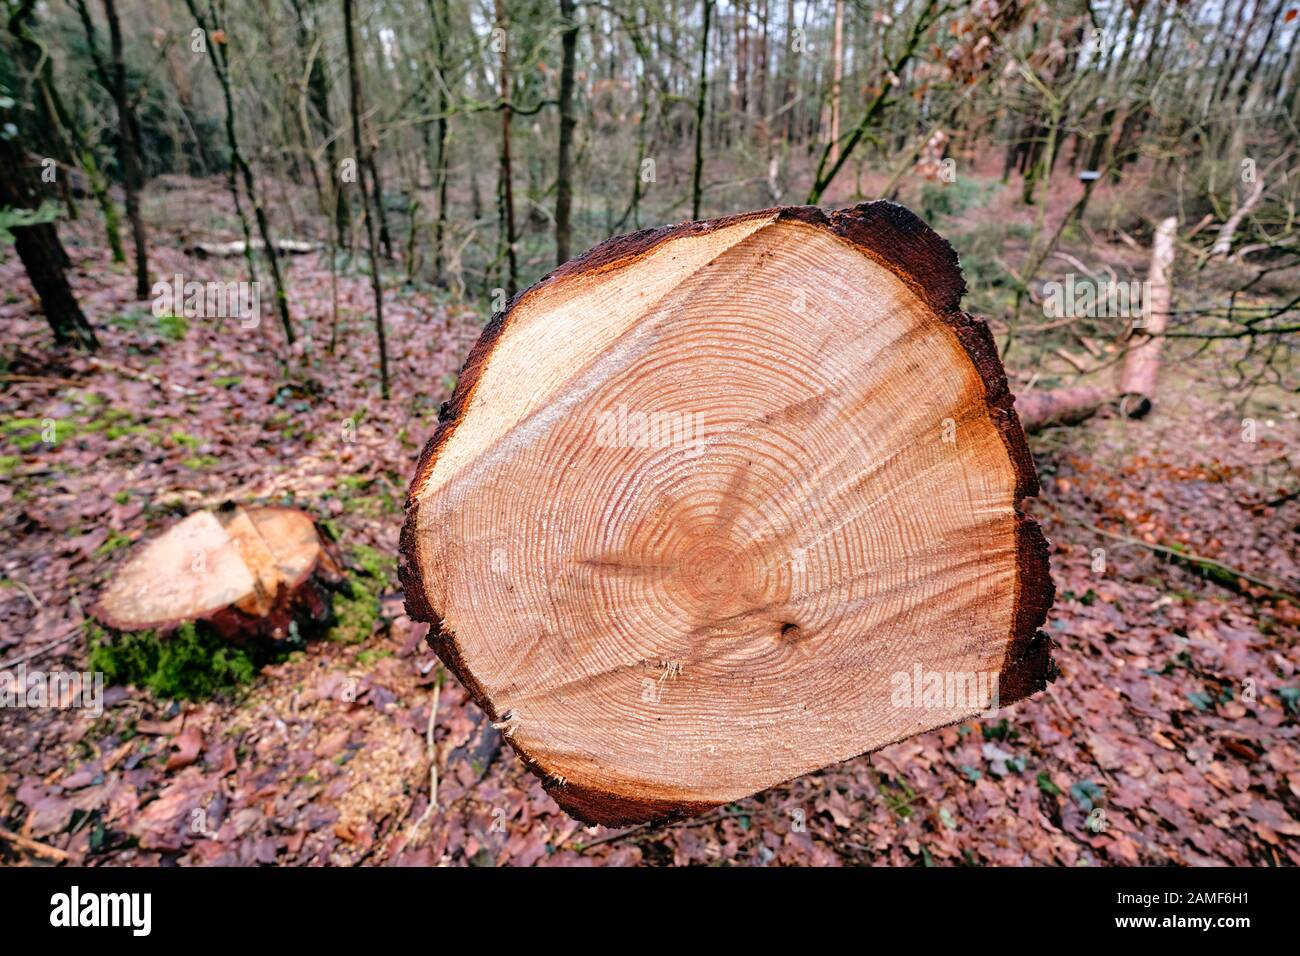 View at the annual rings of a freshly felled tree in the winter forest. Seen in Bavaria, Germany in January. Stock Photo